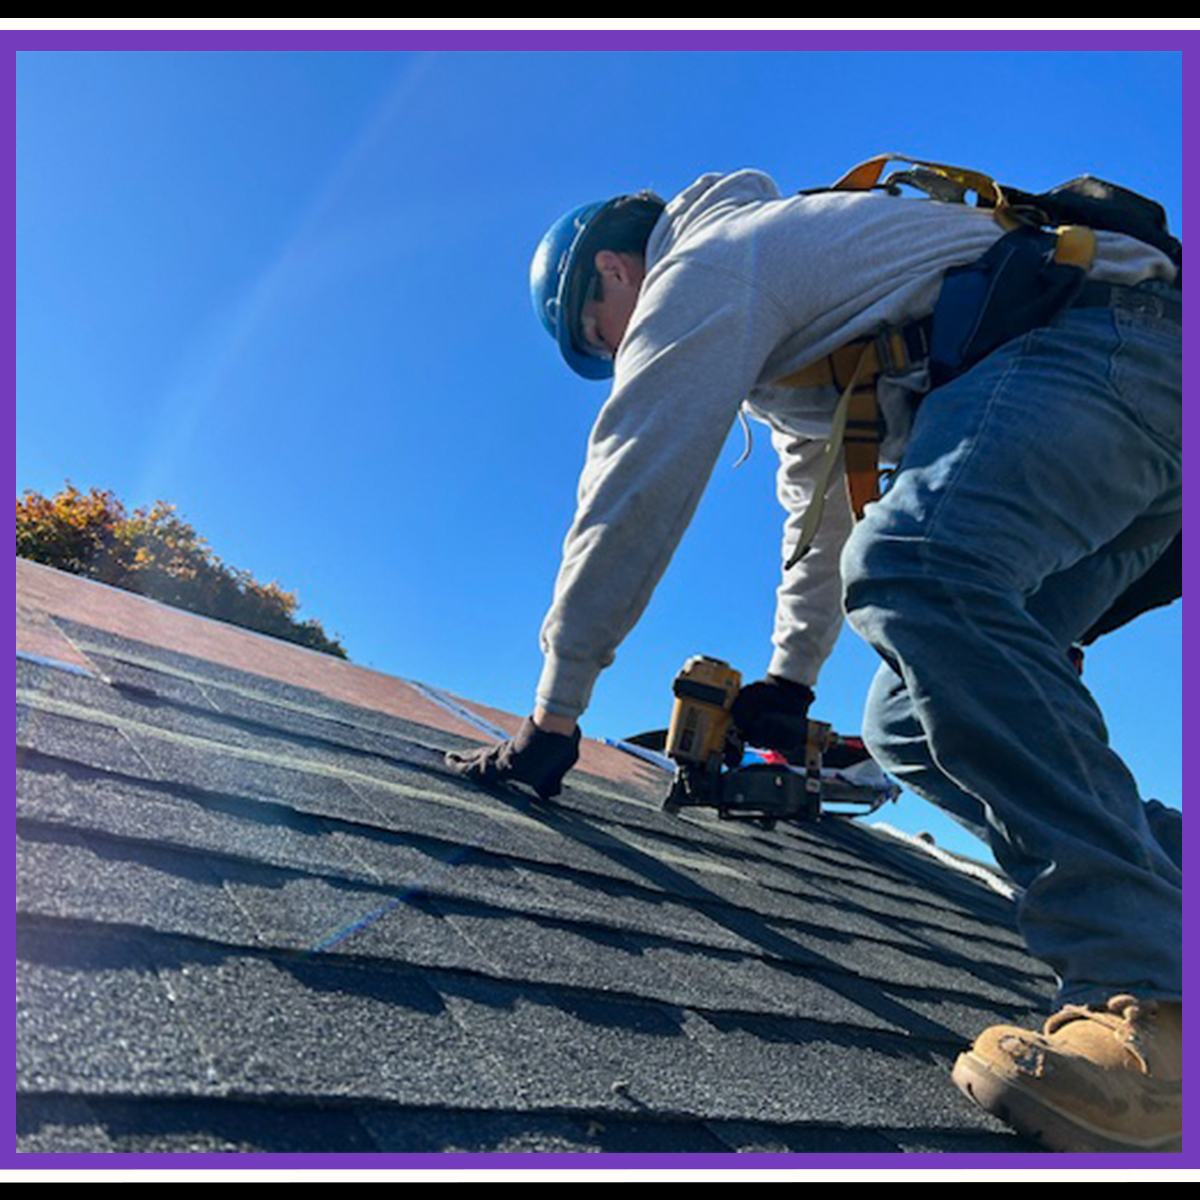 Our #carpentry students are reaching new heights in Career and Technical Education! 🔨  As part of this #construction #trade, students learn #roofing techniques through practical application. #WeAreShawsheen #ShawTechCTE #CTEisFutureReady